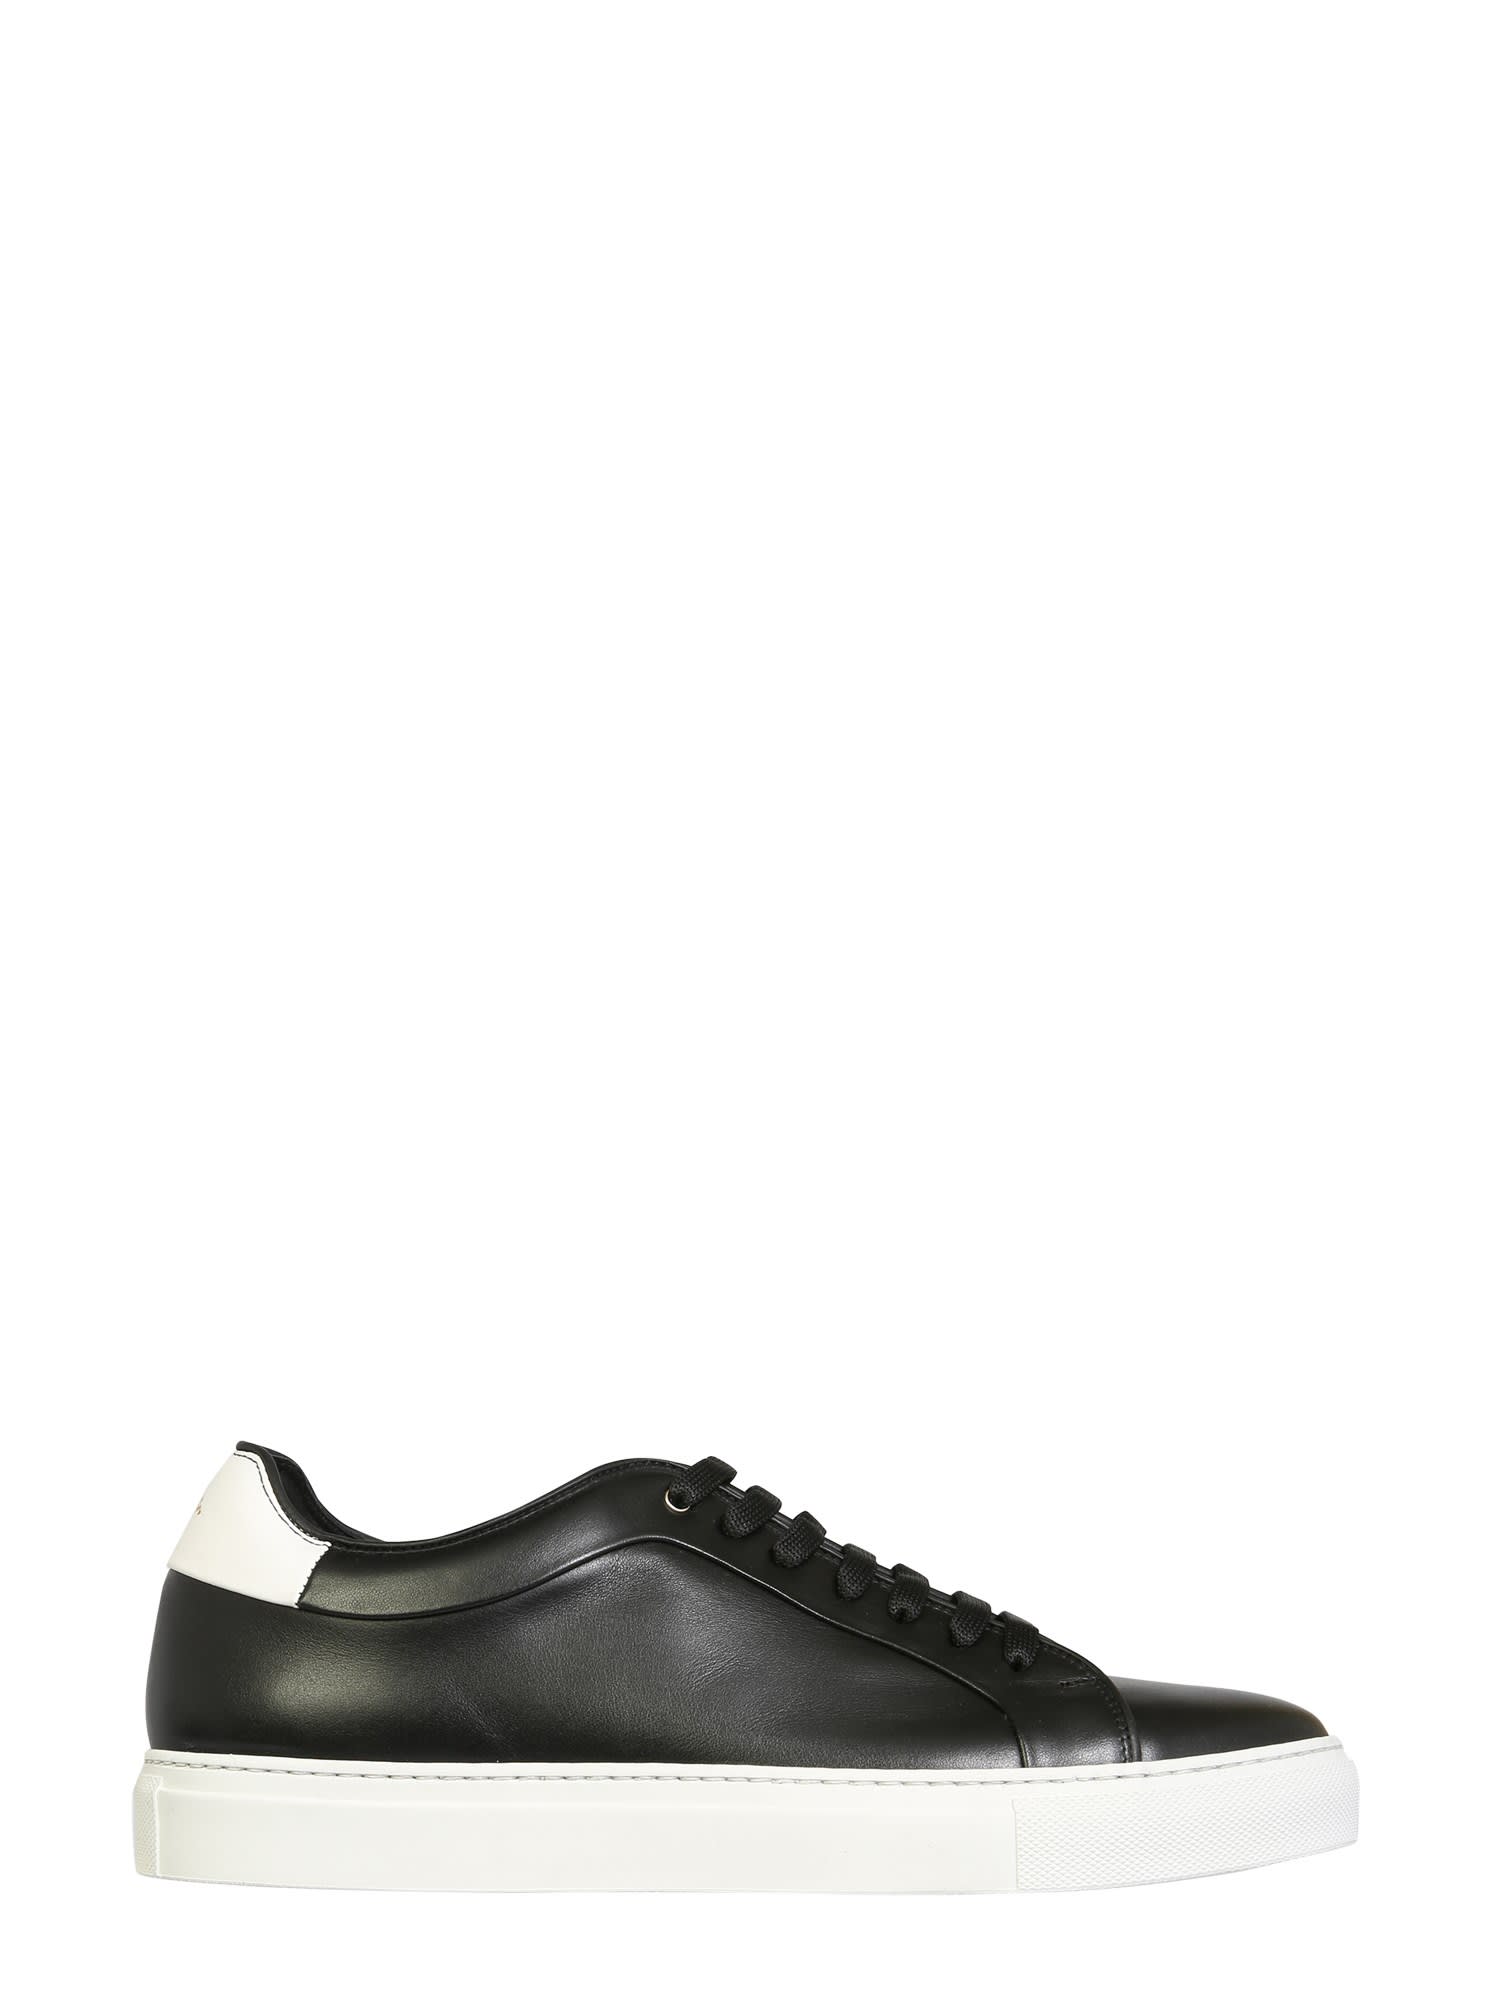 Paul Smith LEATHER SNEAKERS